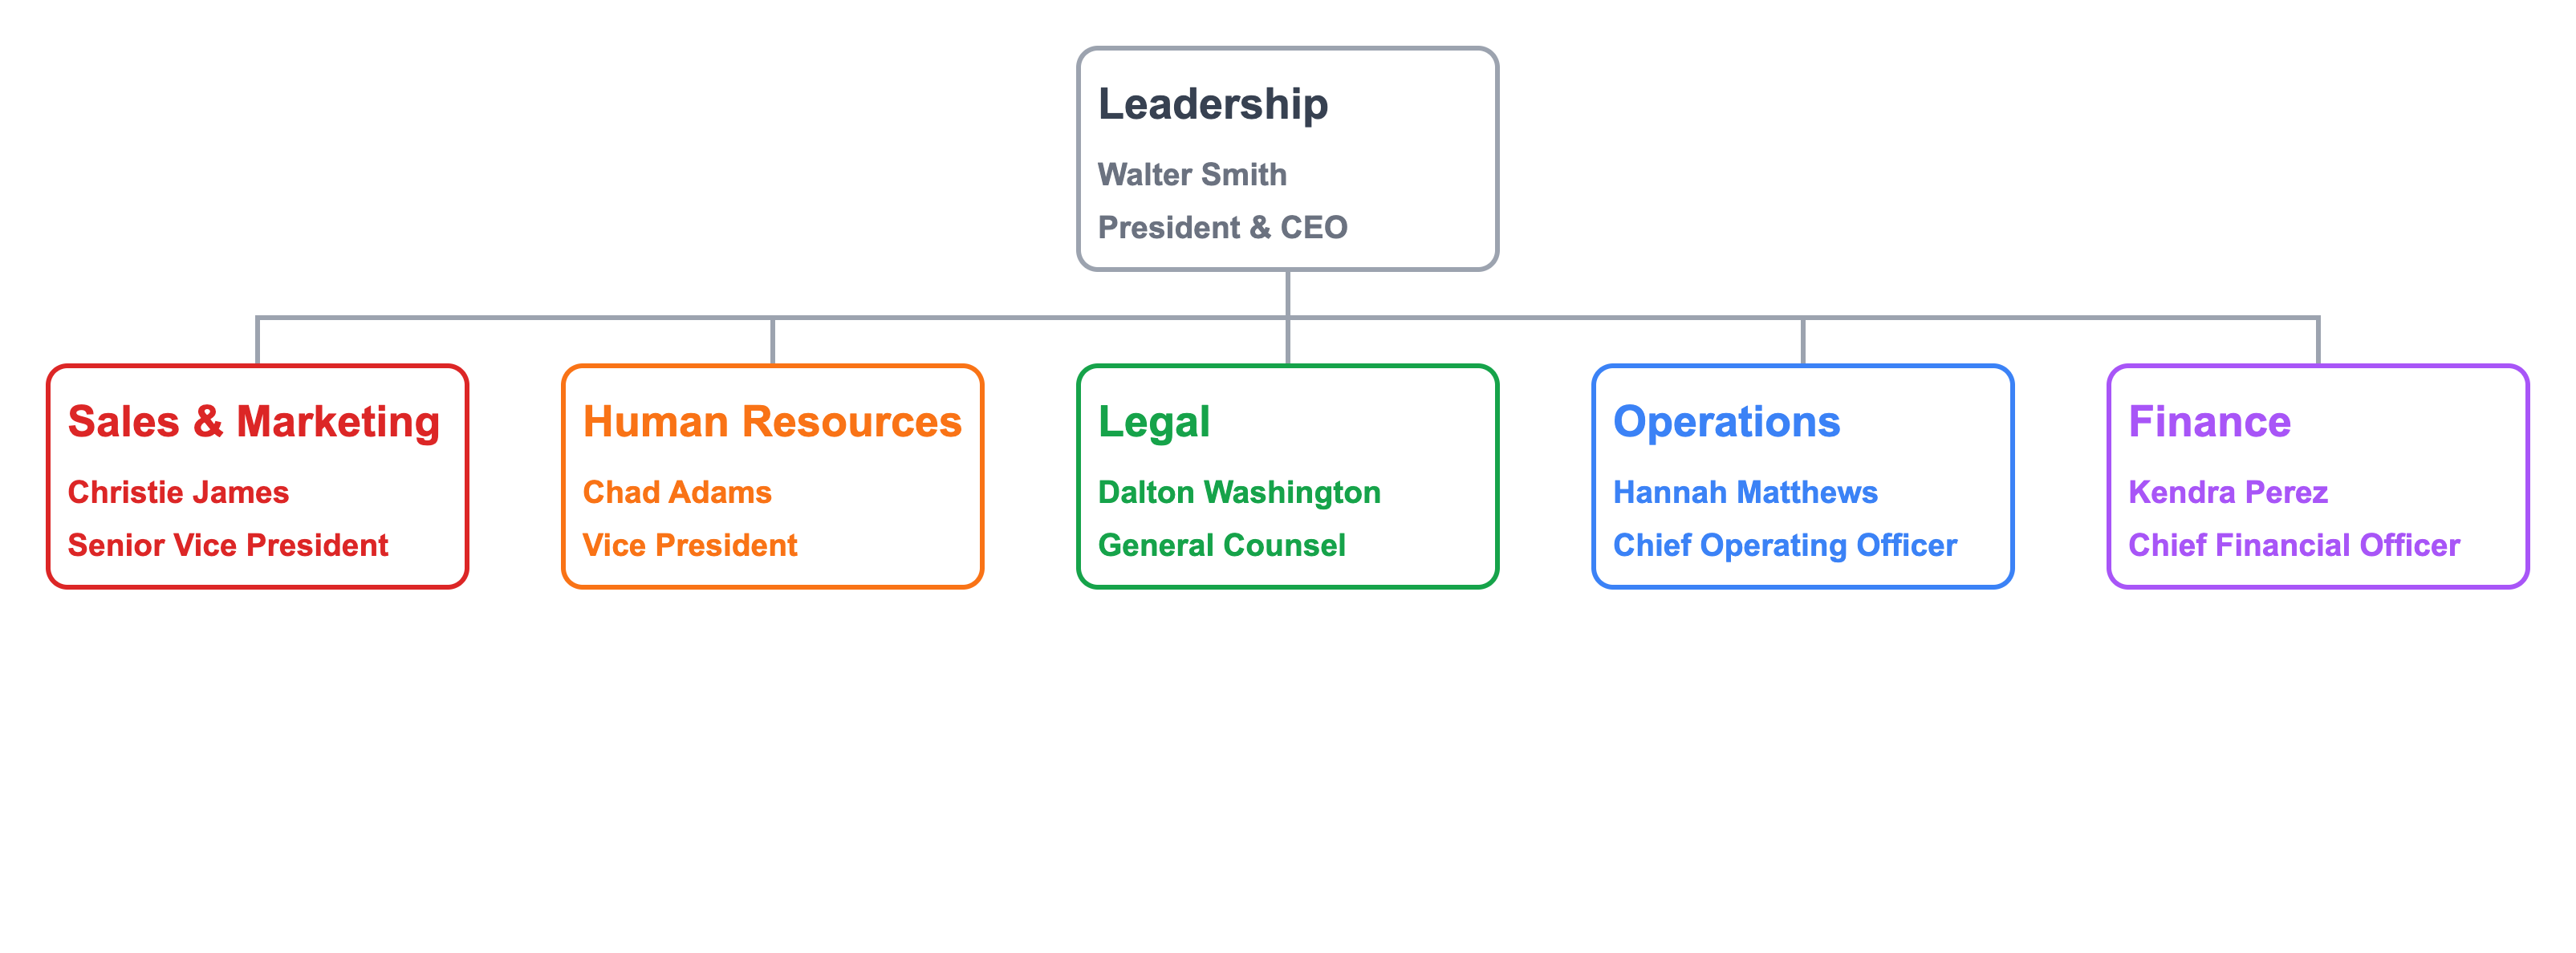 Functional organizational structure by department